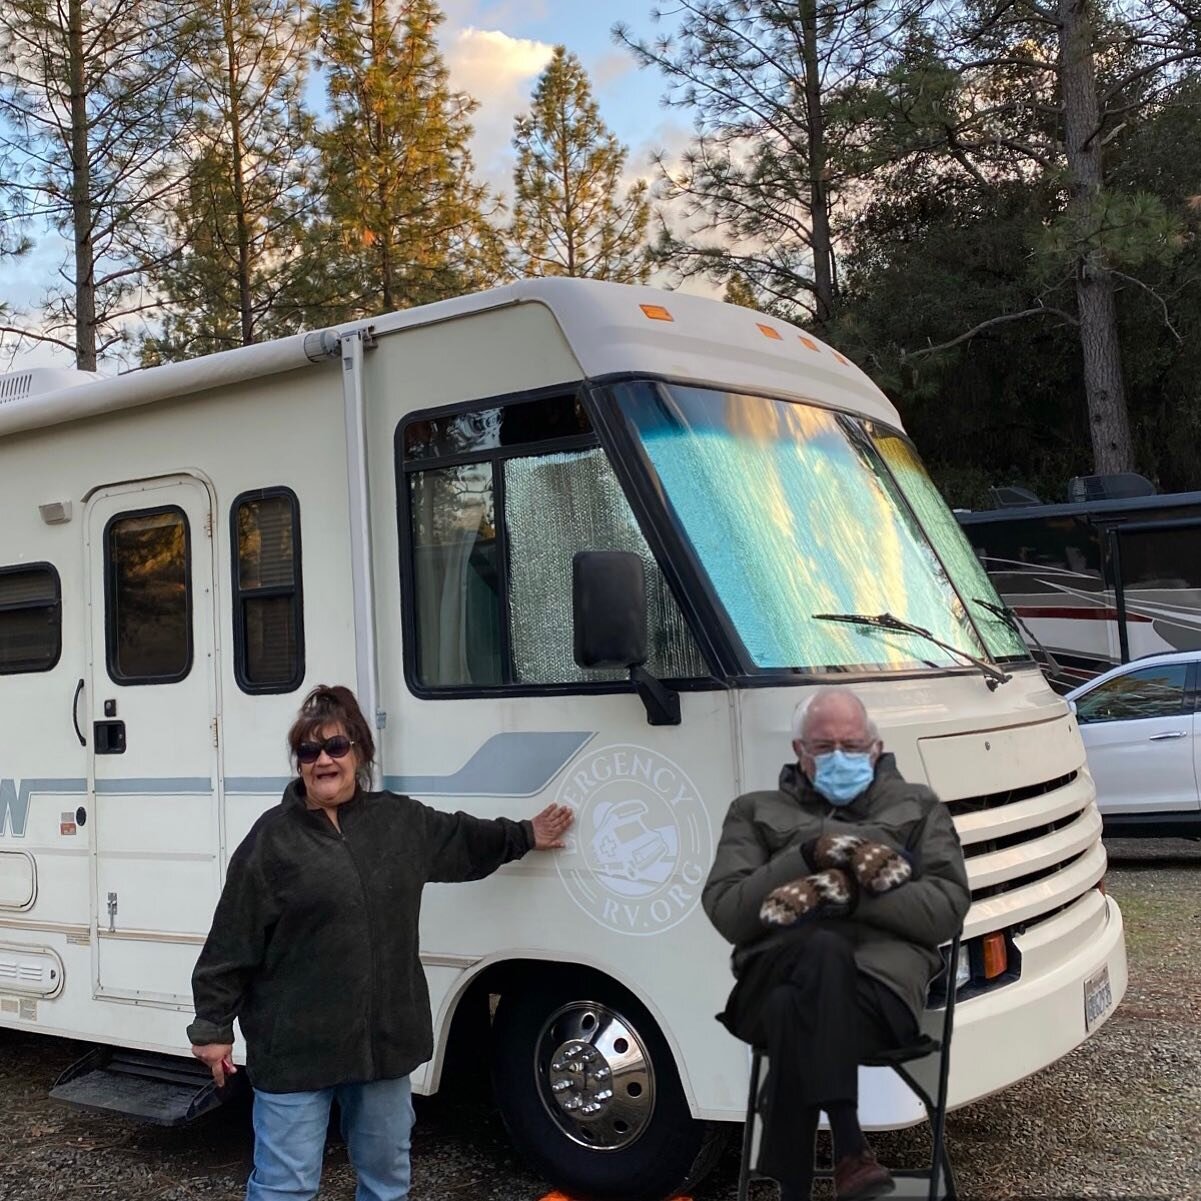 EmergencyRV.org recipient Quin received a a gently used motor home after losing all she and her husband owned due to a recent fire. The couple also had a special visitor stop by today despite the cold. We are happy to report that they will all have a